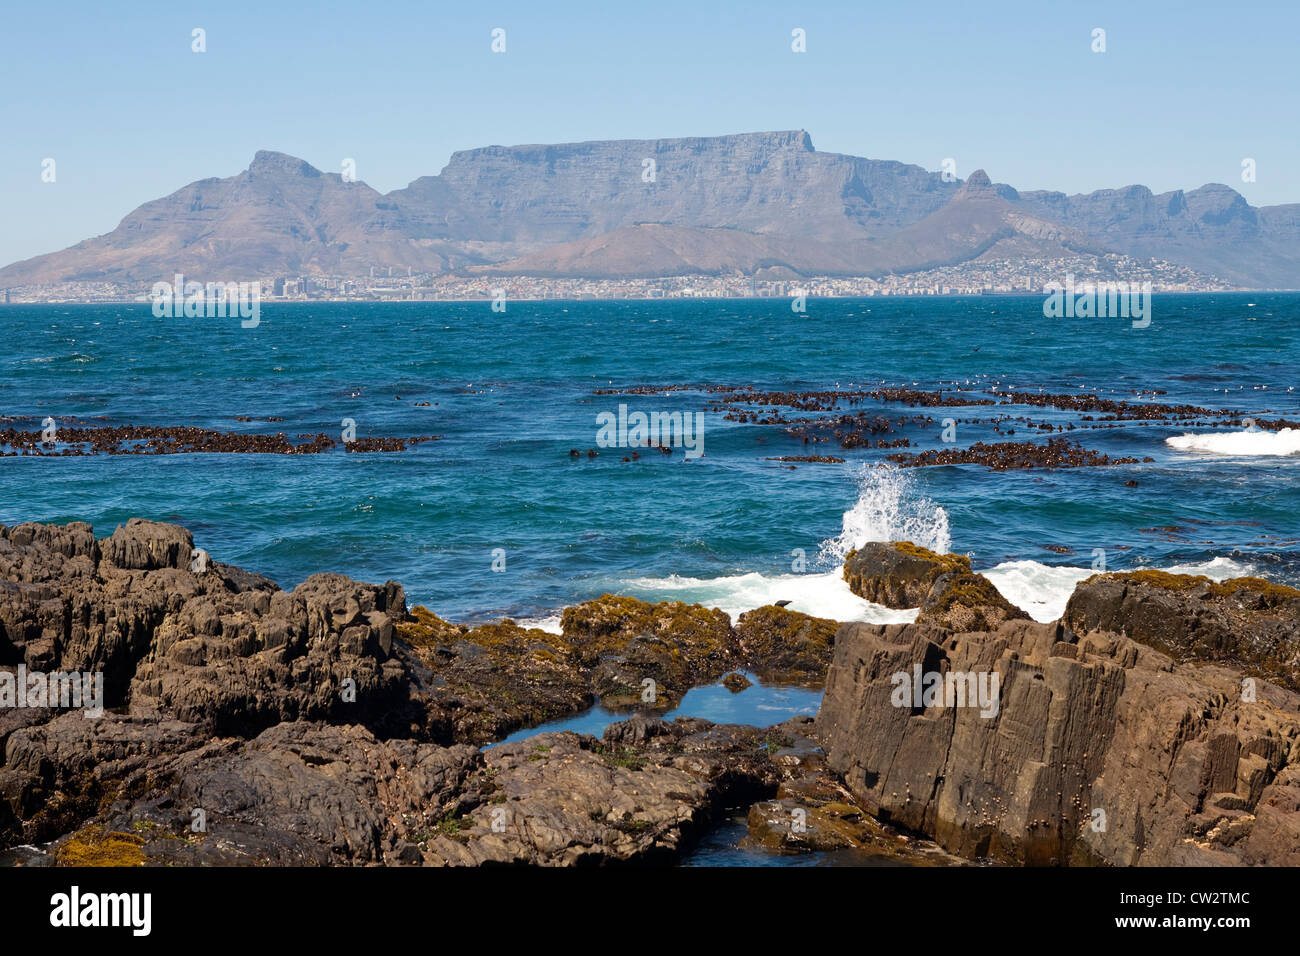 Table Mountain in the distance from Robben Island, South Africa. Stock Photo